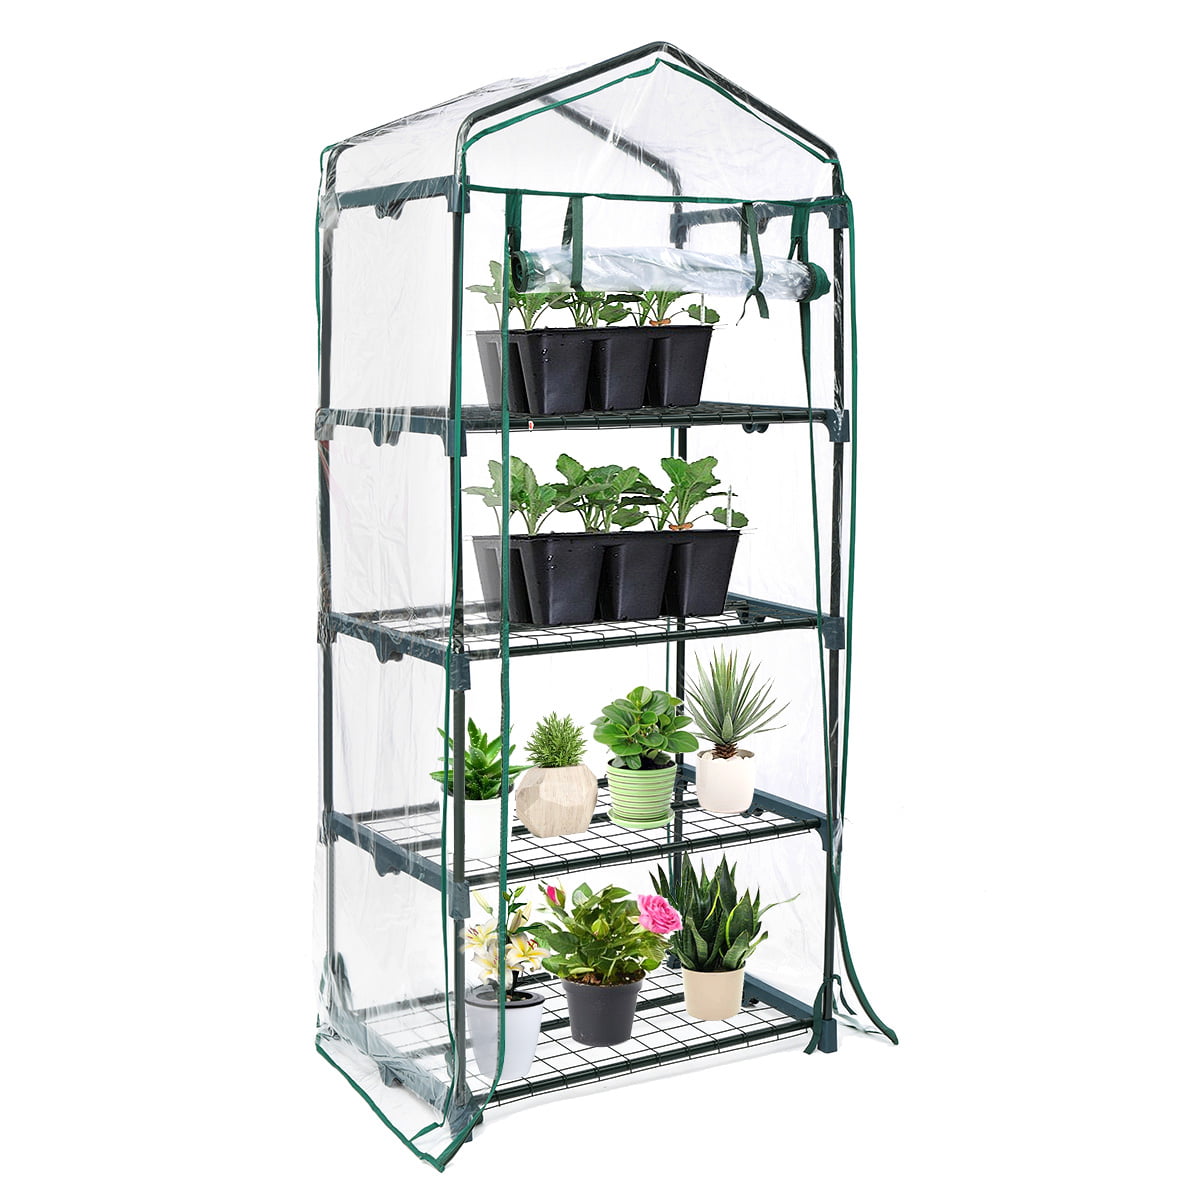 4-Tier Greenhouse Cultivating Plants Seeds Flowers Storage with Shelves Protect 